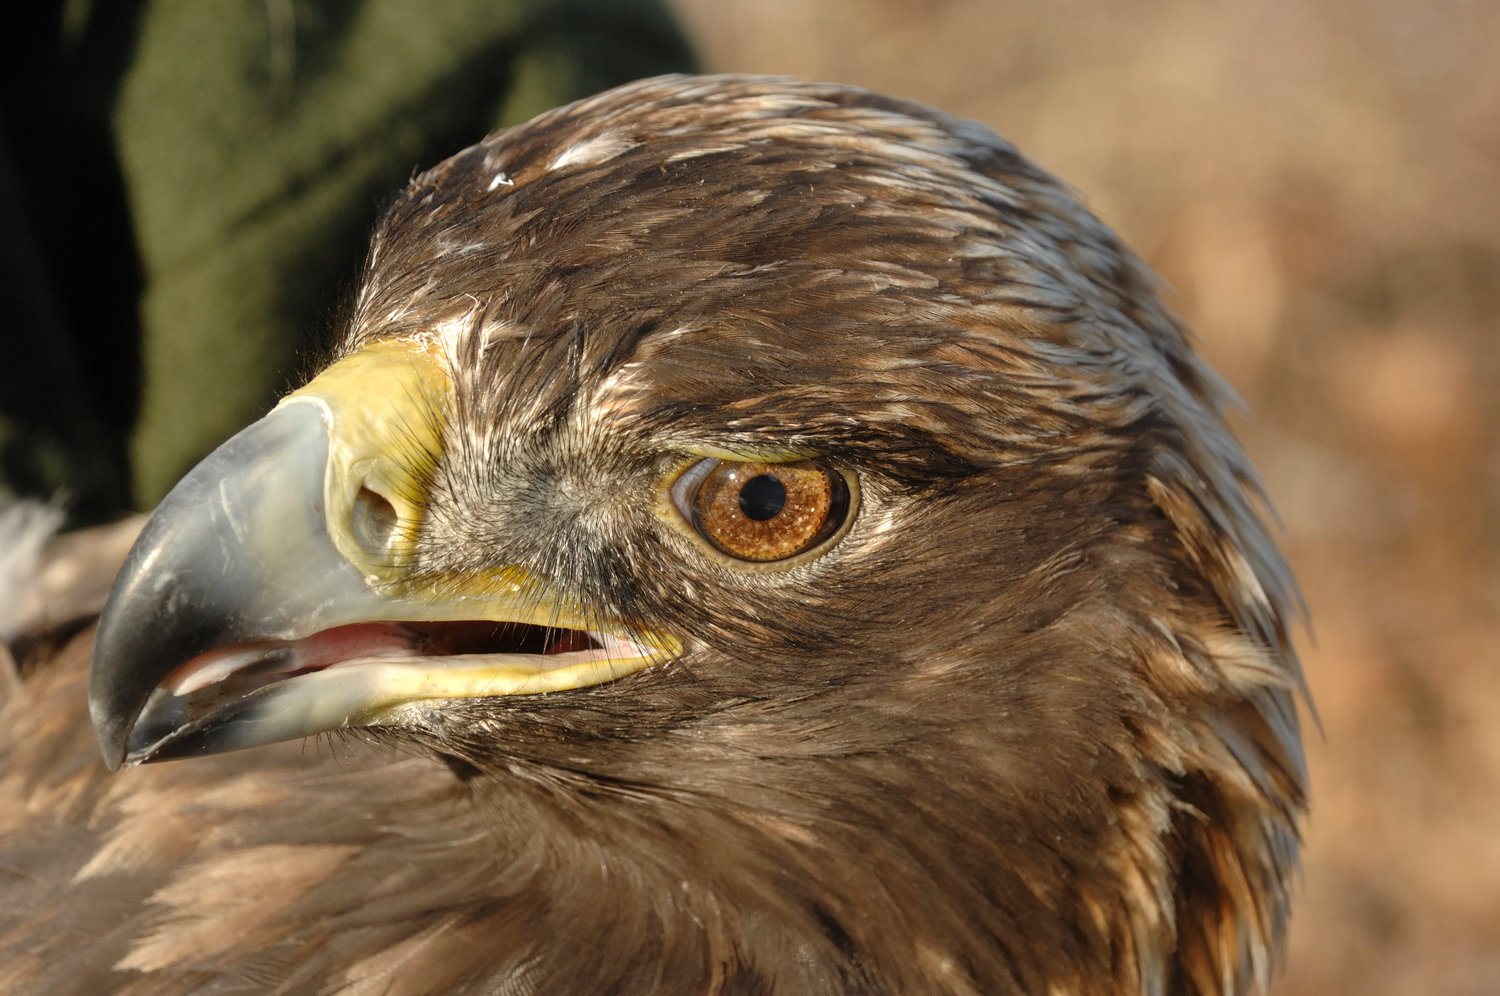 In January of 2008, this golden eagle was trapped by the NYSDEC as part of an Upper Delaware eagle study. It was a female adult, weighing in at an even 14 pounds. Goldens are slightly larger than bald eagles. During the spring of 2009, this eagle migrated almost 1300 miles to her breeding territory in northern Labrador. It appeared that she had a nest high up on the side of a gorge that had a stream running through it. Her telemetry worked for two years, and she returned to our region for the second winter.